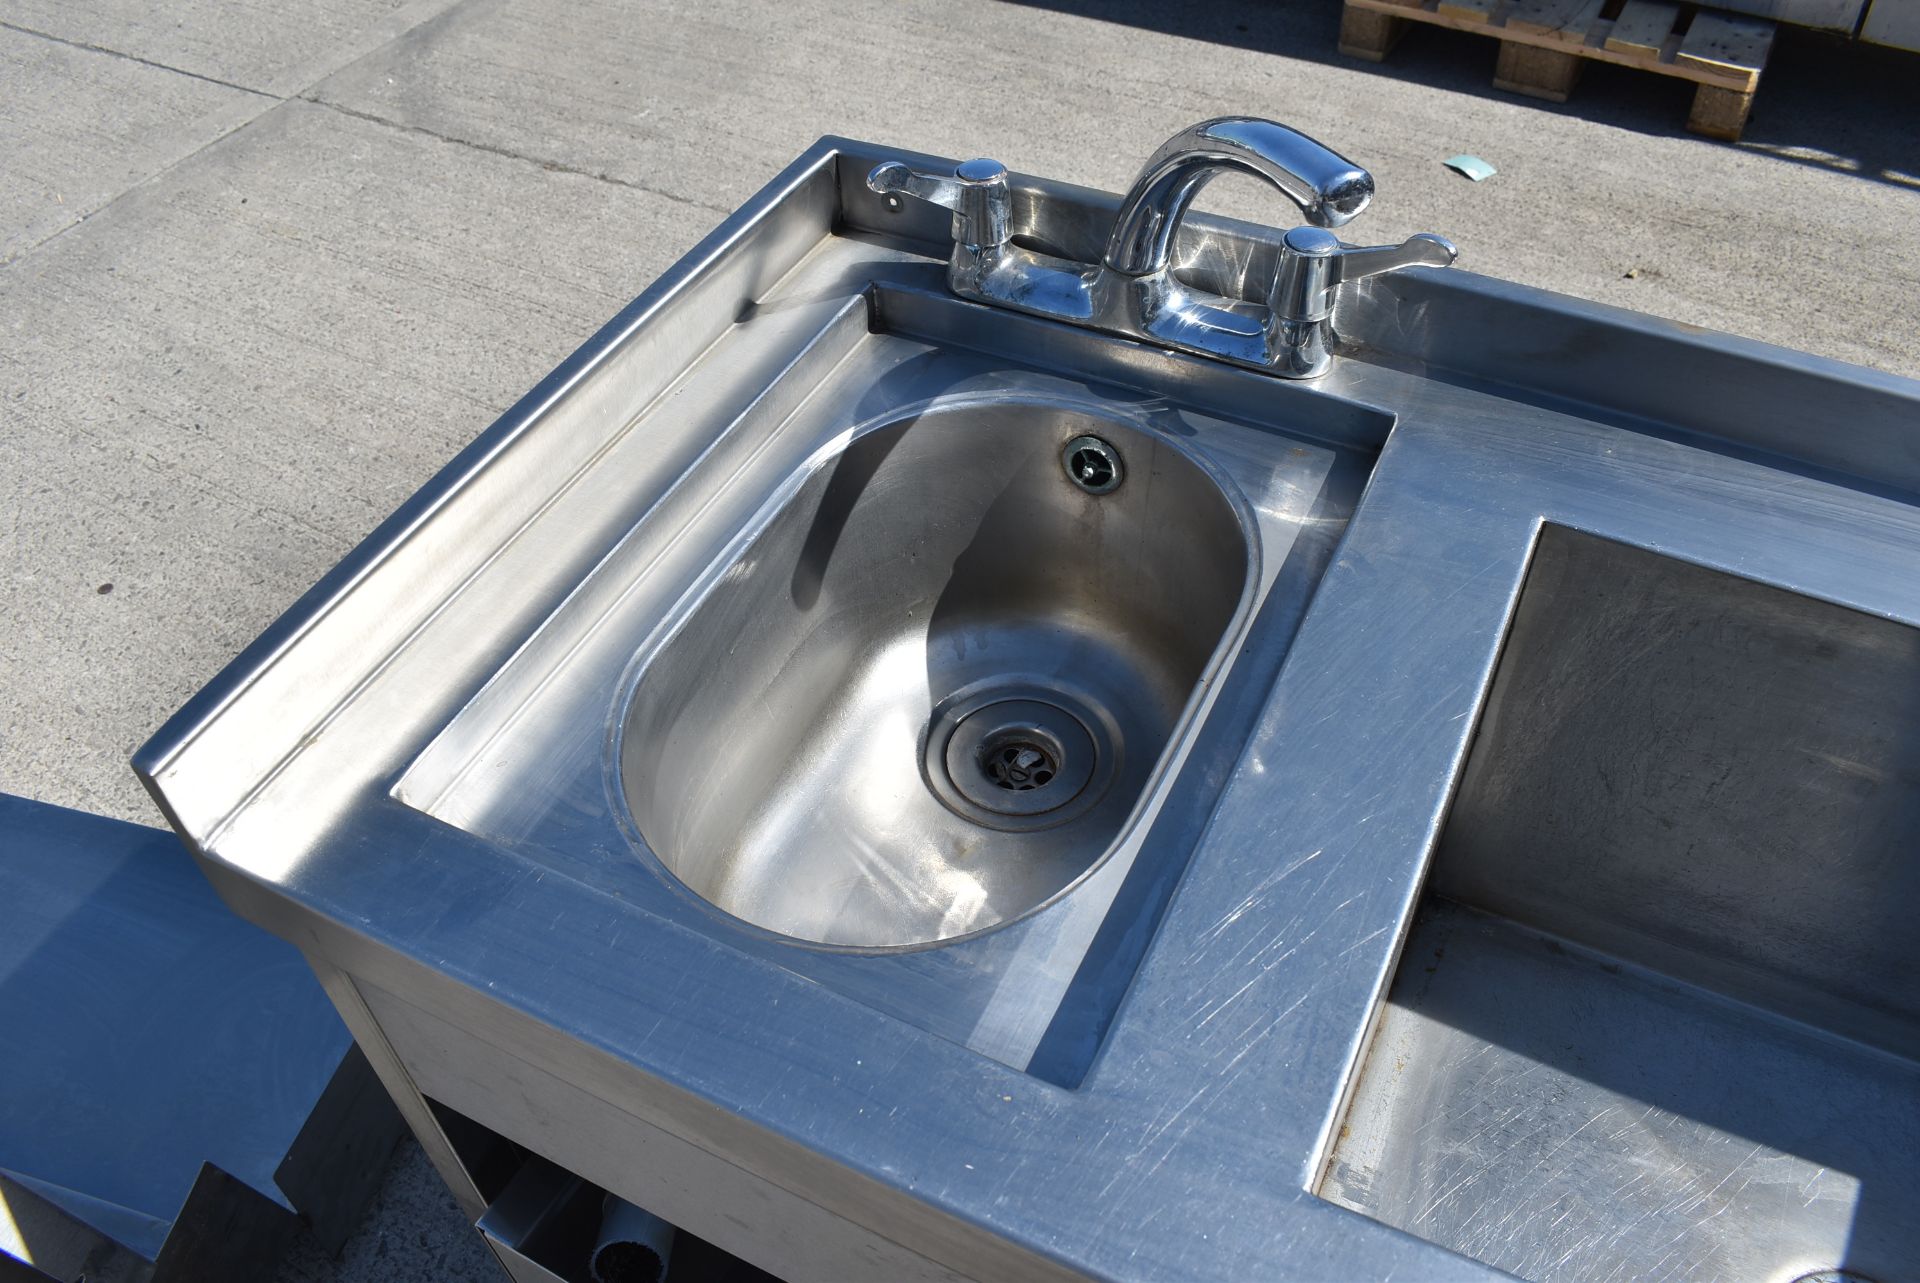 1 x Stainless Steel Wash Basin Unit For Commercial Kitchens - H87 x W117 x D53 cms - CL282 - Ref - Image 2 of 8